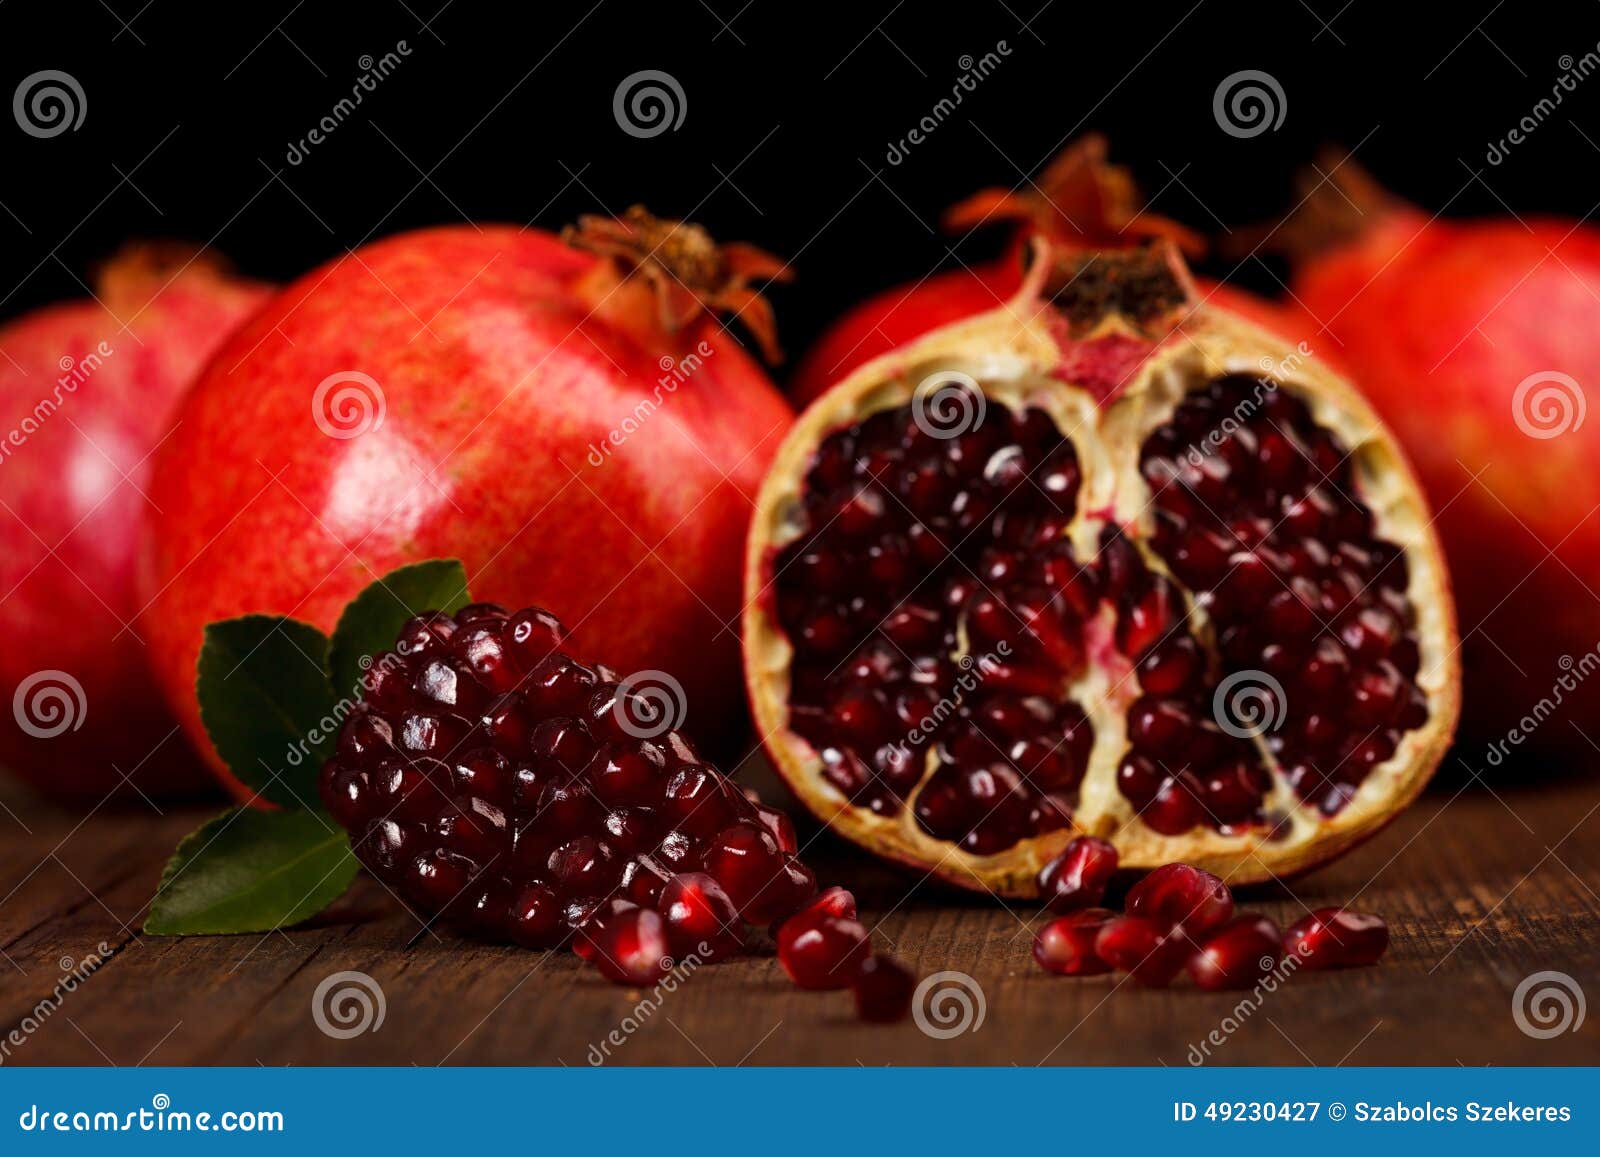 grenadine fruits and seeds on wooden table